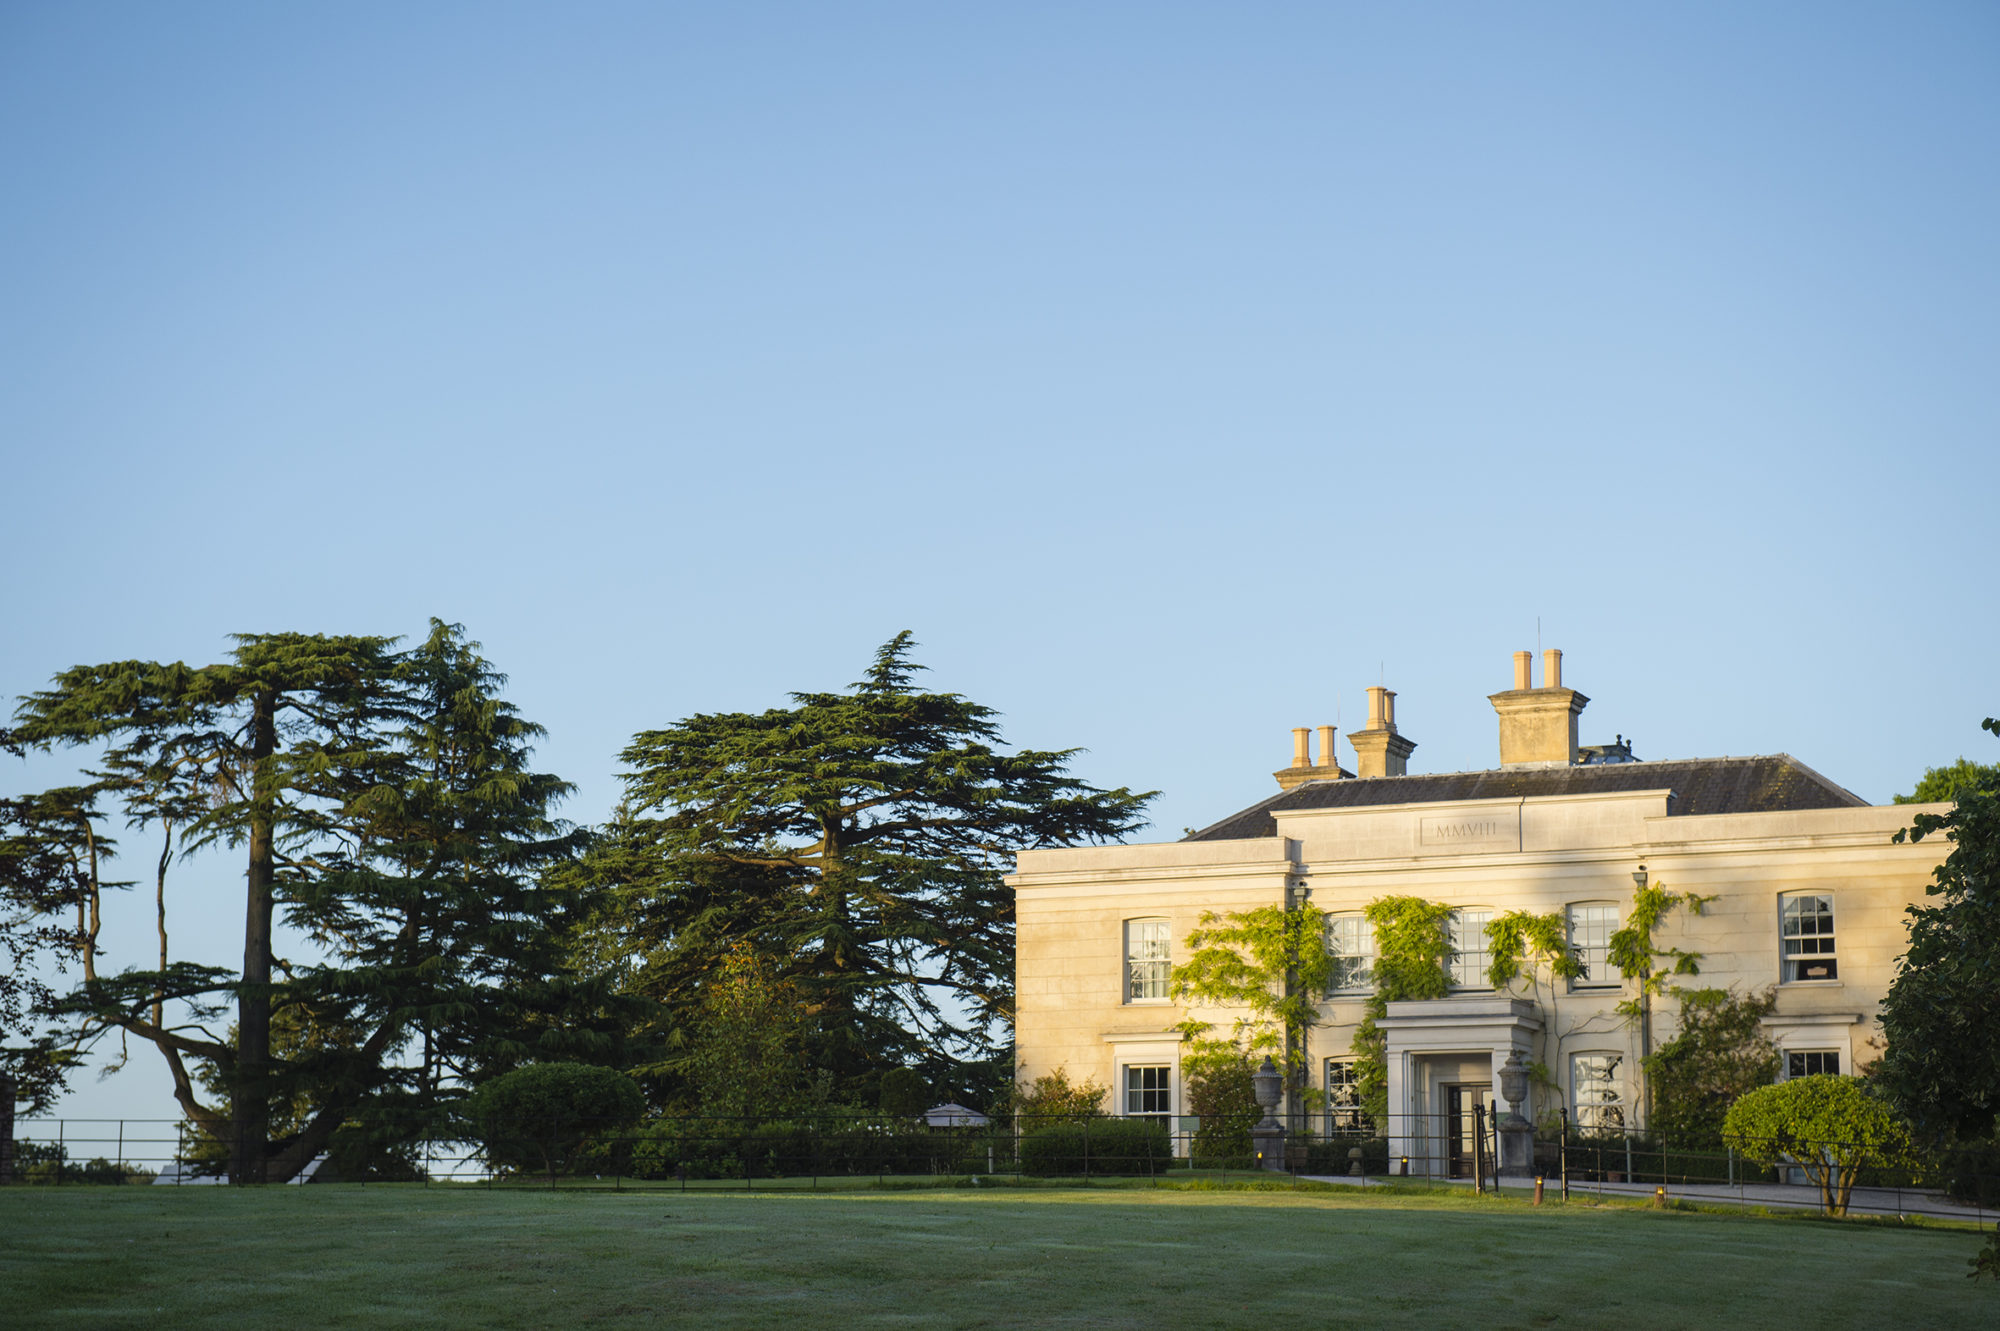 The Limewood Hotel exterior surrounded by large trees and blue skies